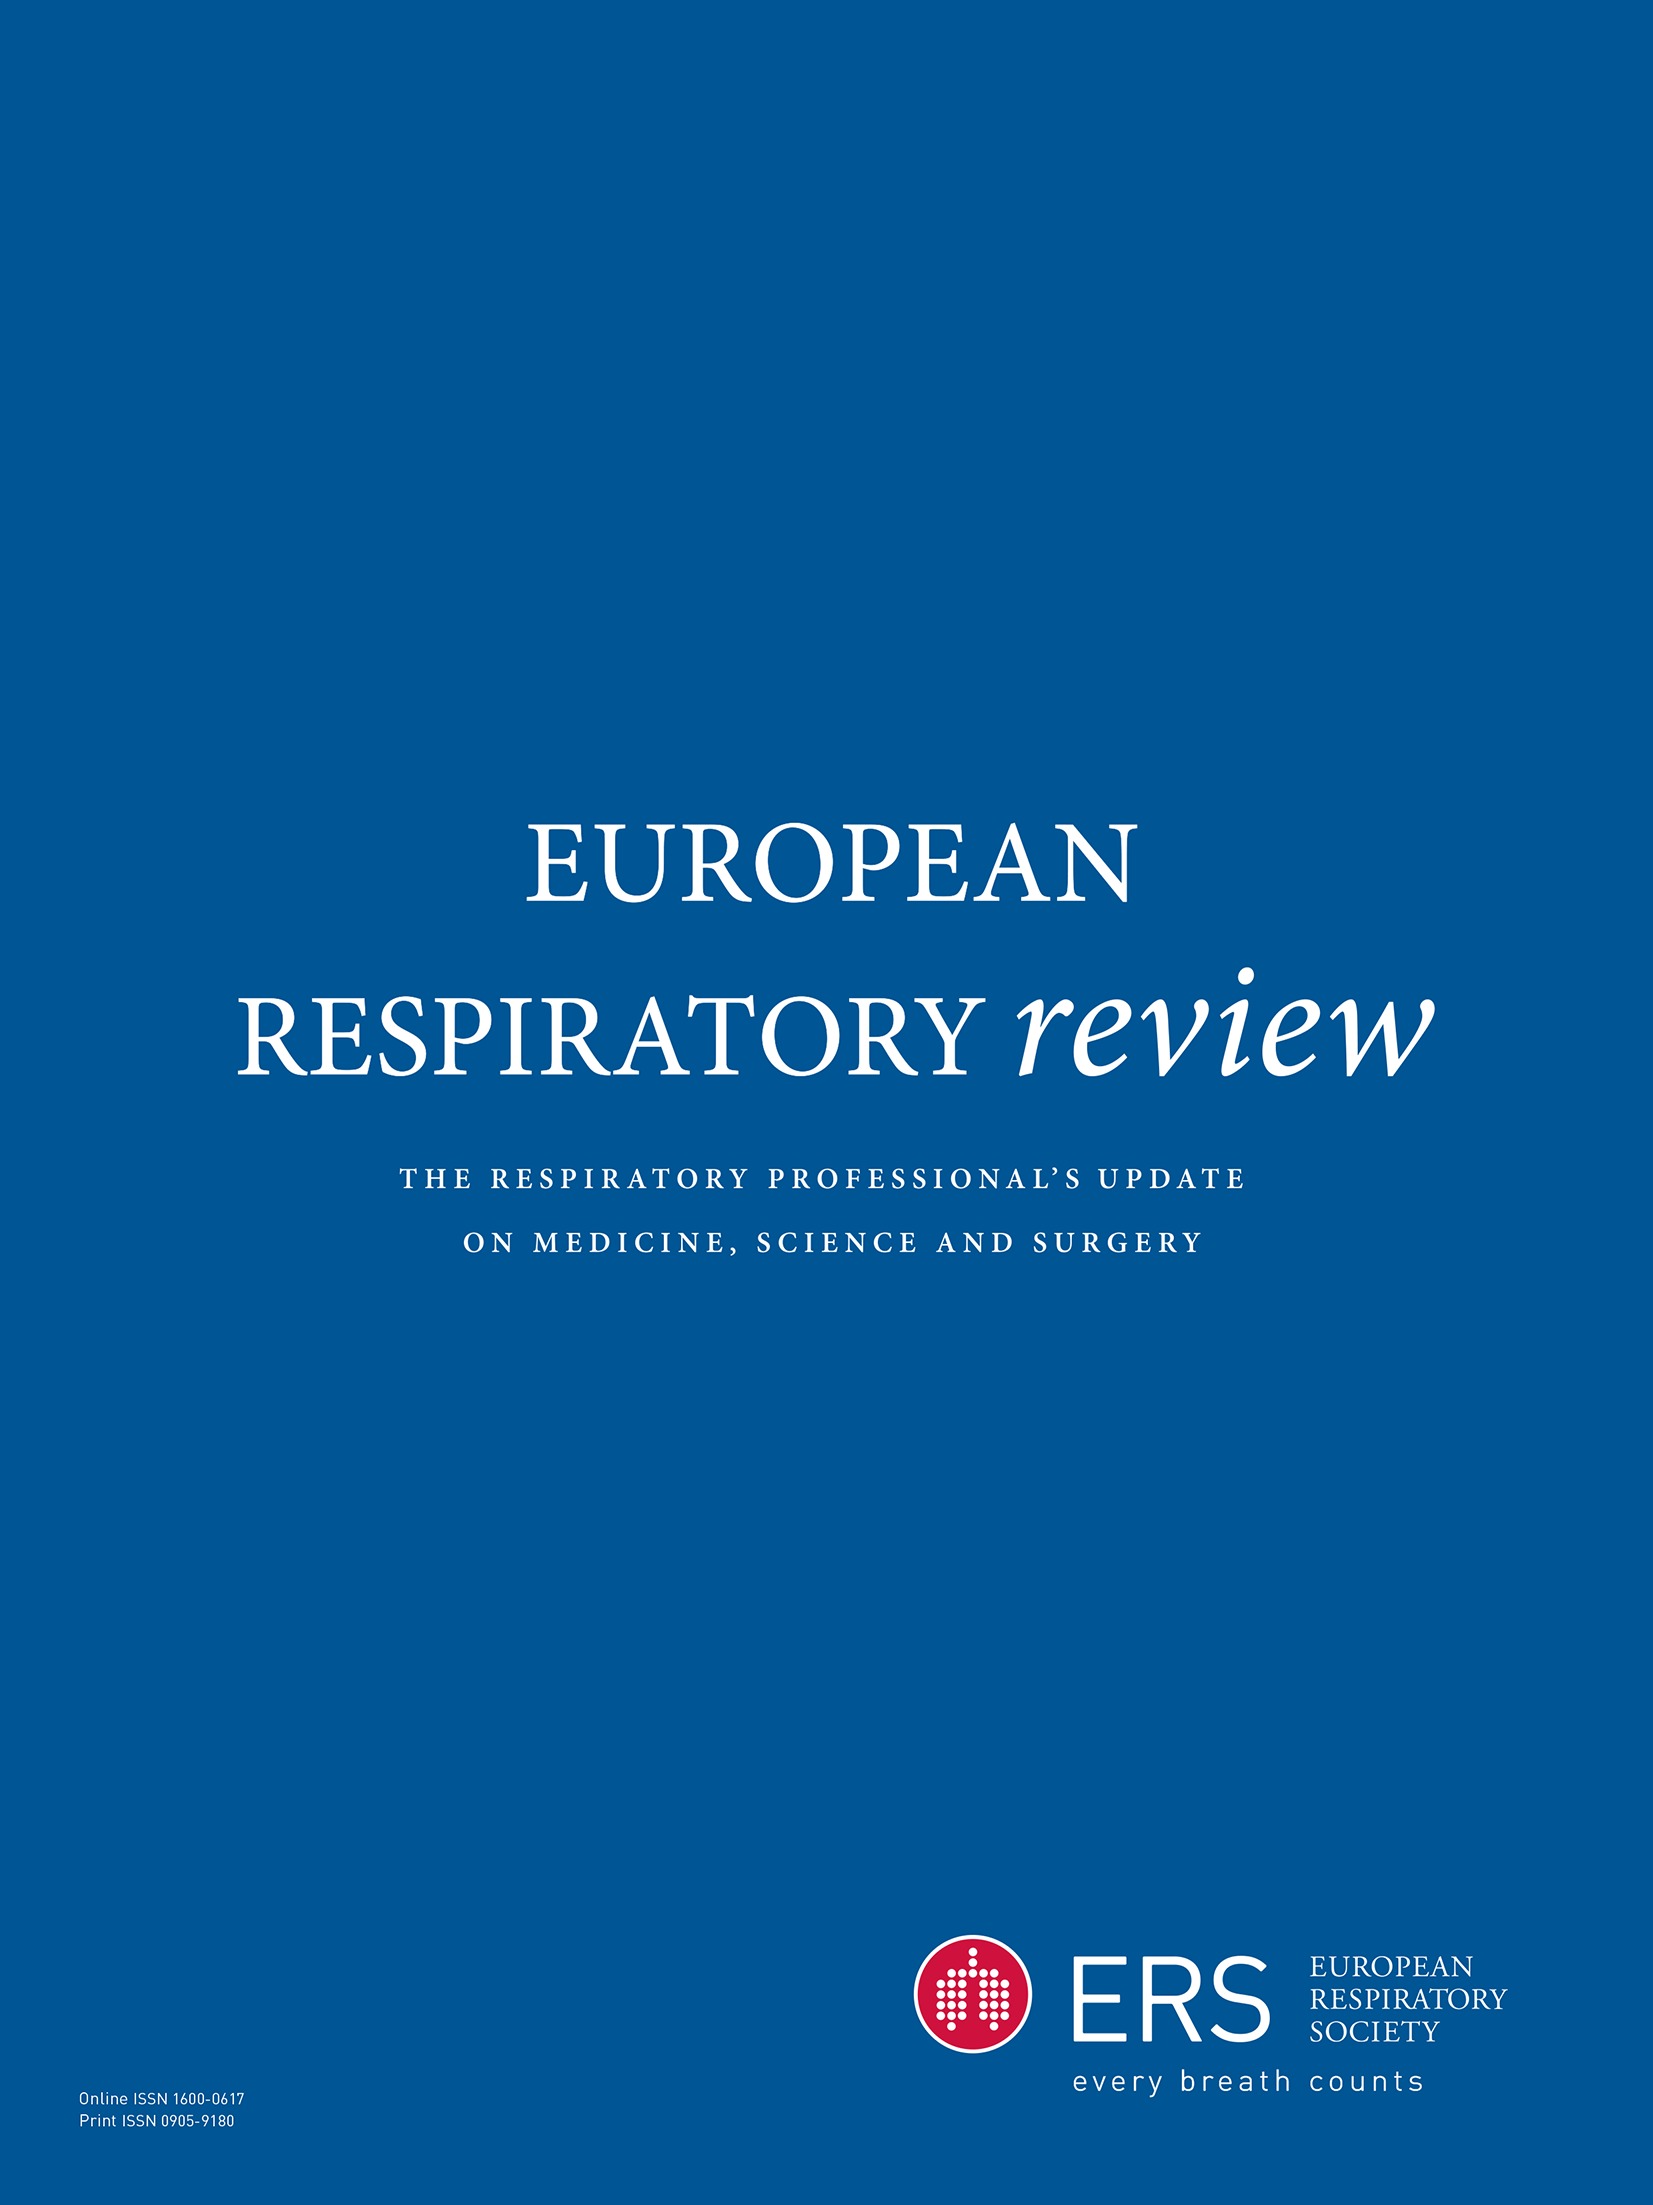 Self-management interventions for people with pulmonary fibrosis: a scoping review